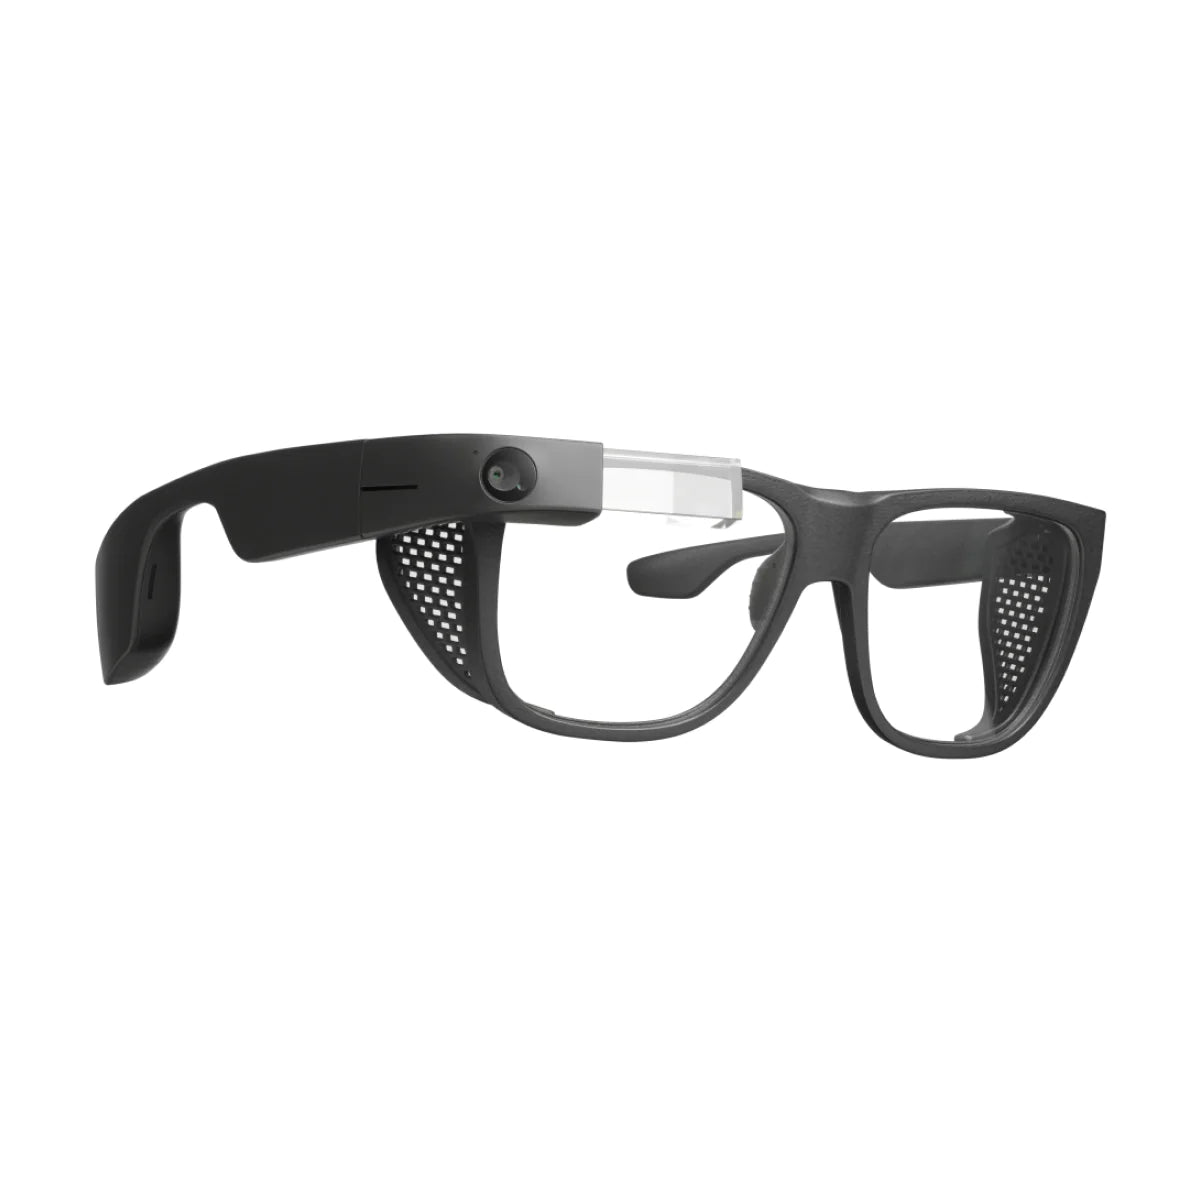 Envision Glasses with Smith Optics Frames Side View